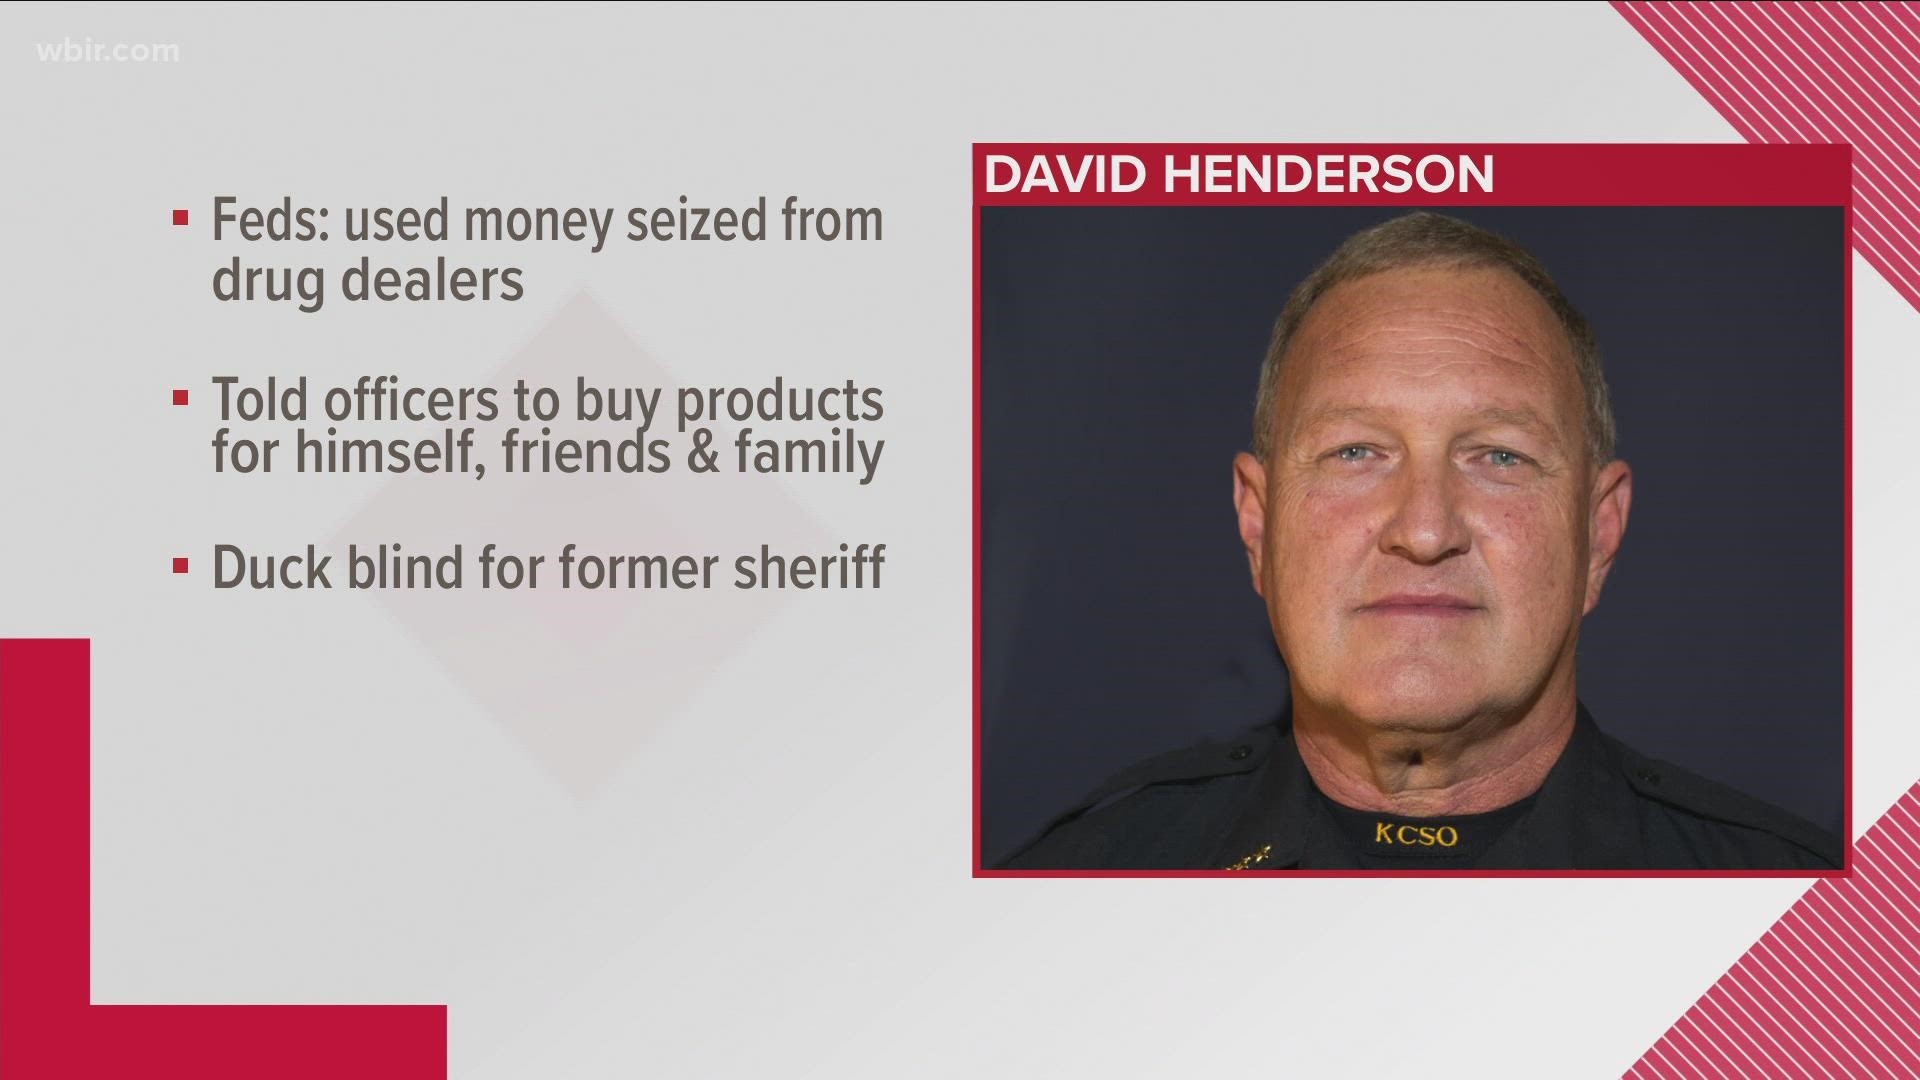 David Henderson, former KCSO assistant chief, abruptly retired in April 2020. He's alleged to have used drug money to buy personal items.